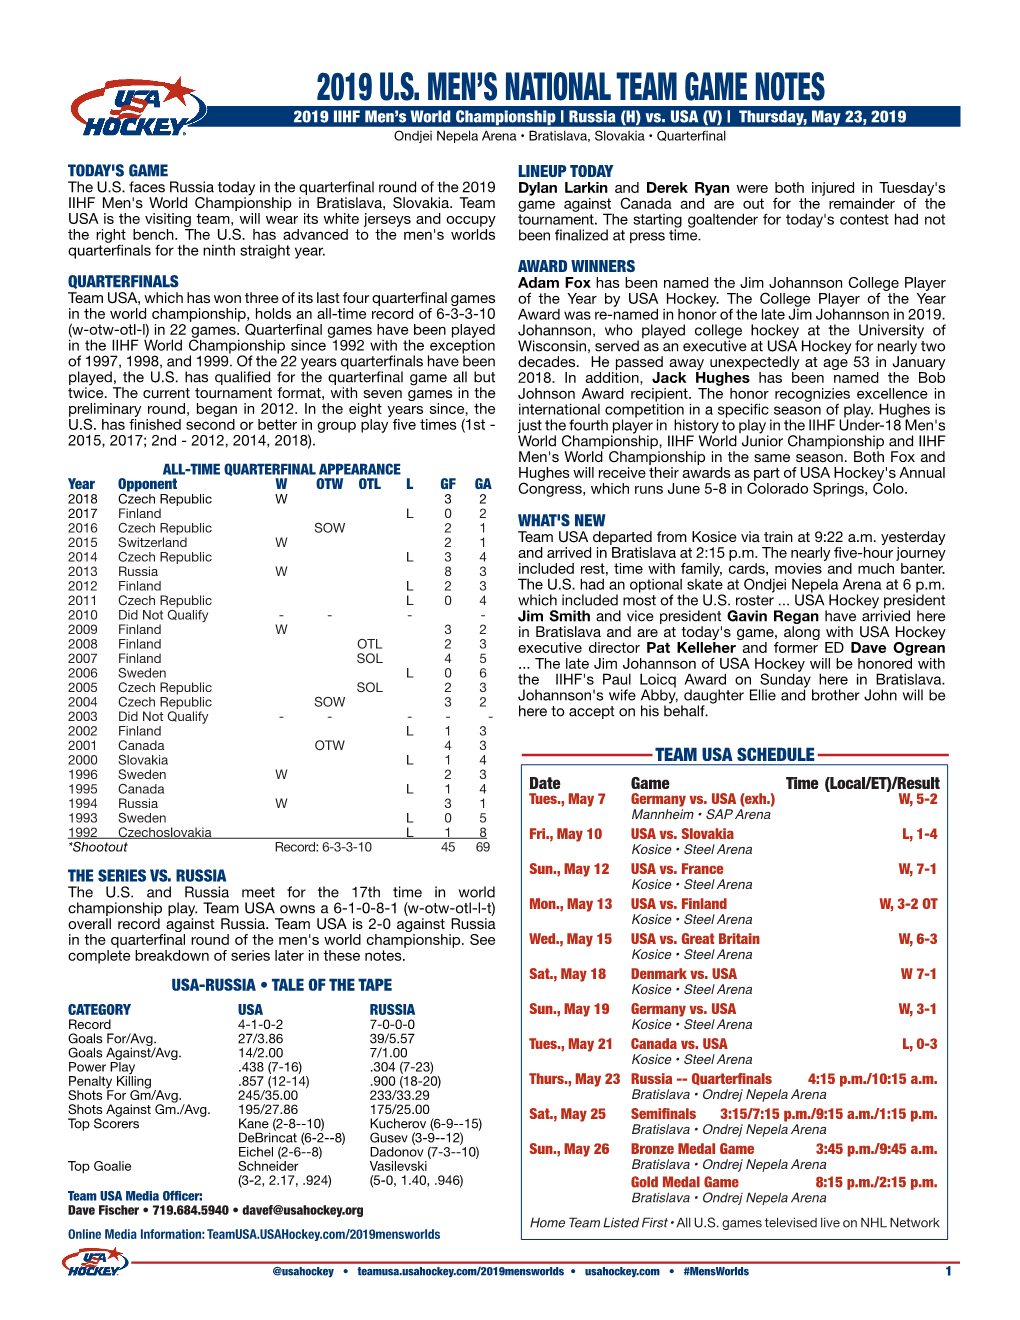 Game Notes Vs. Russia